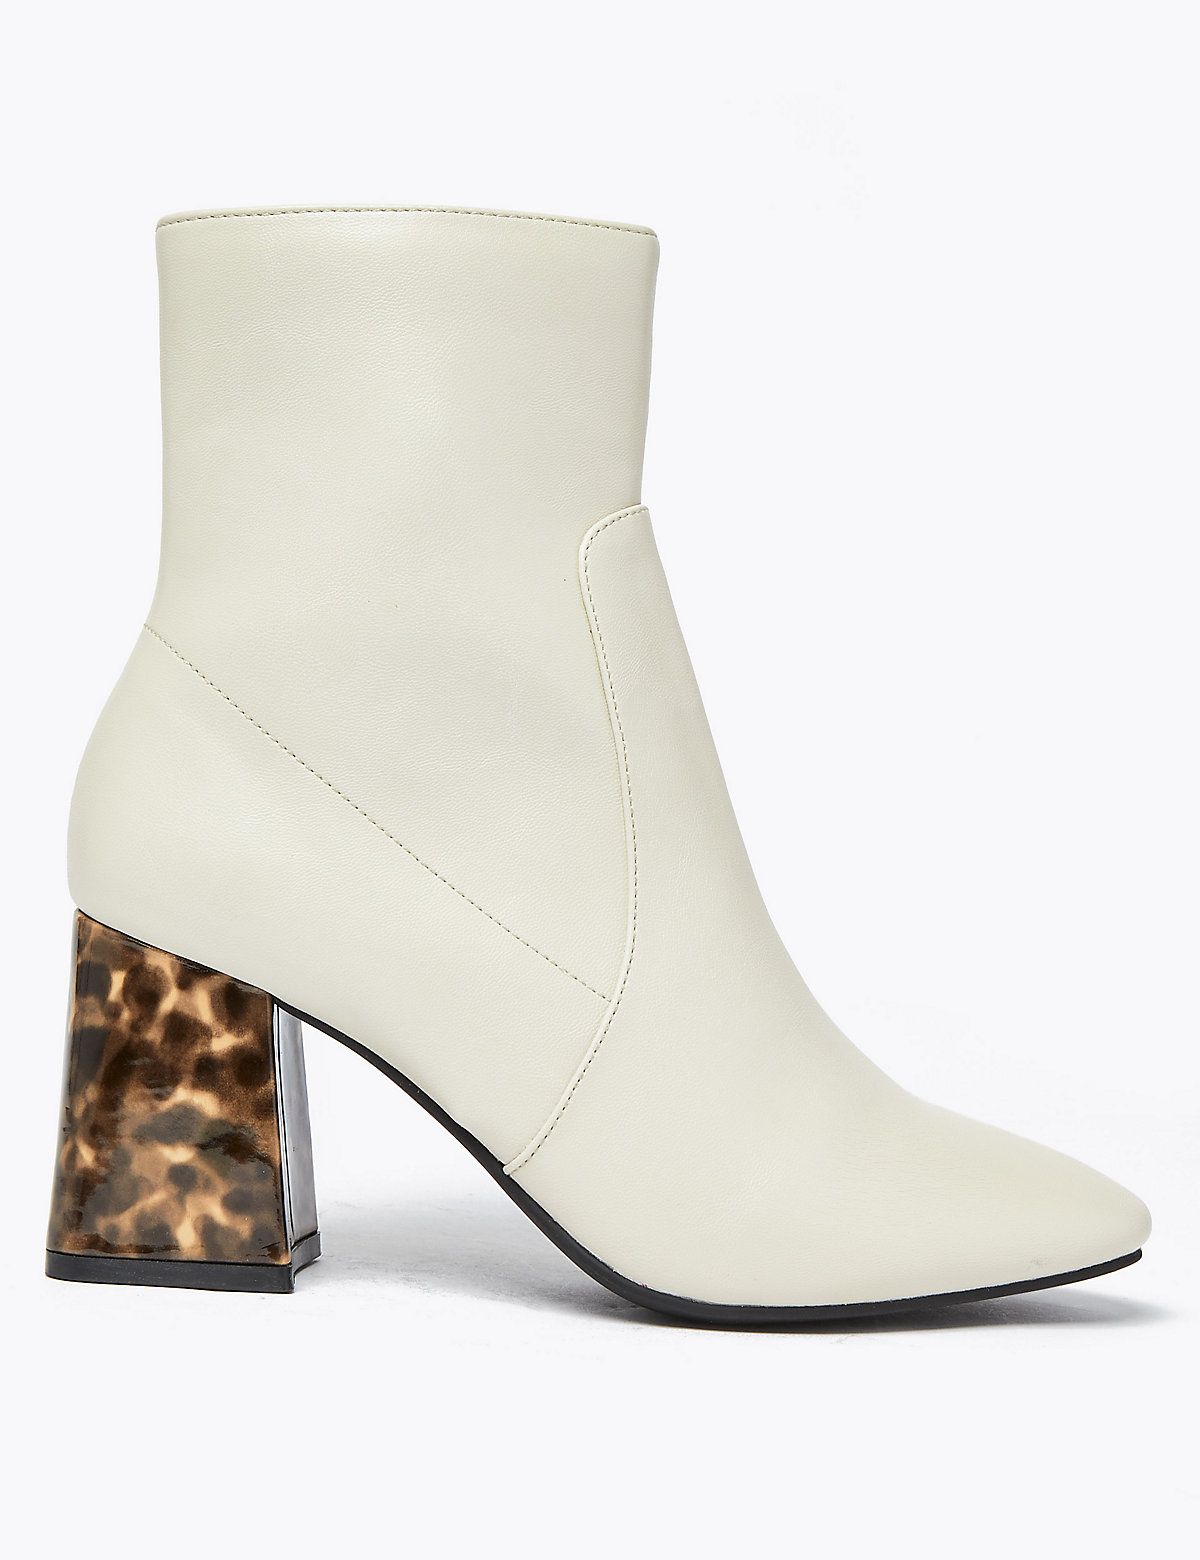 m&s tan ankle boots